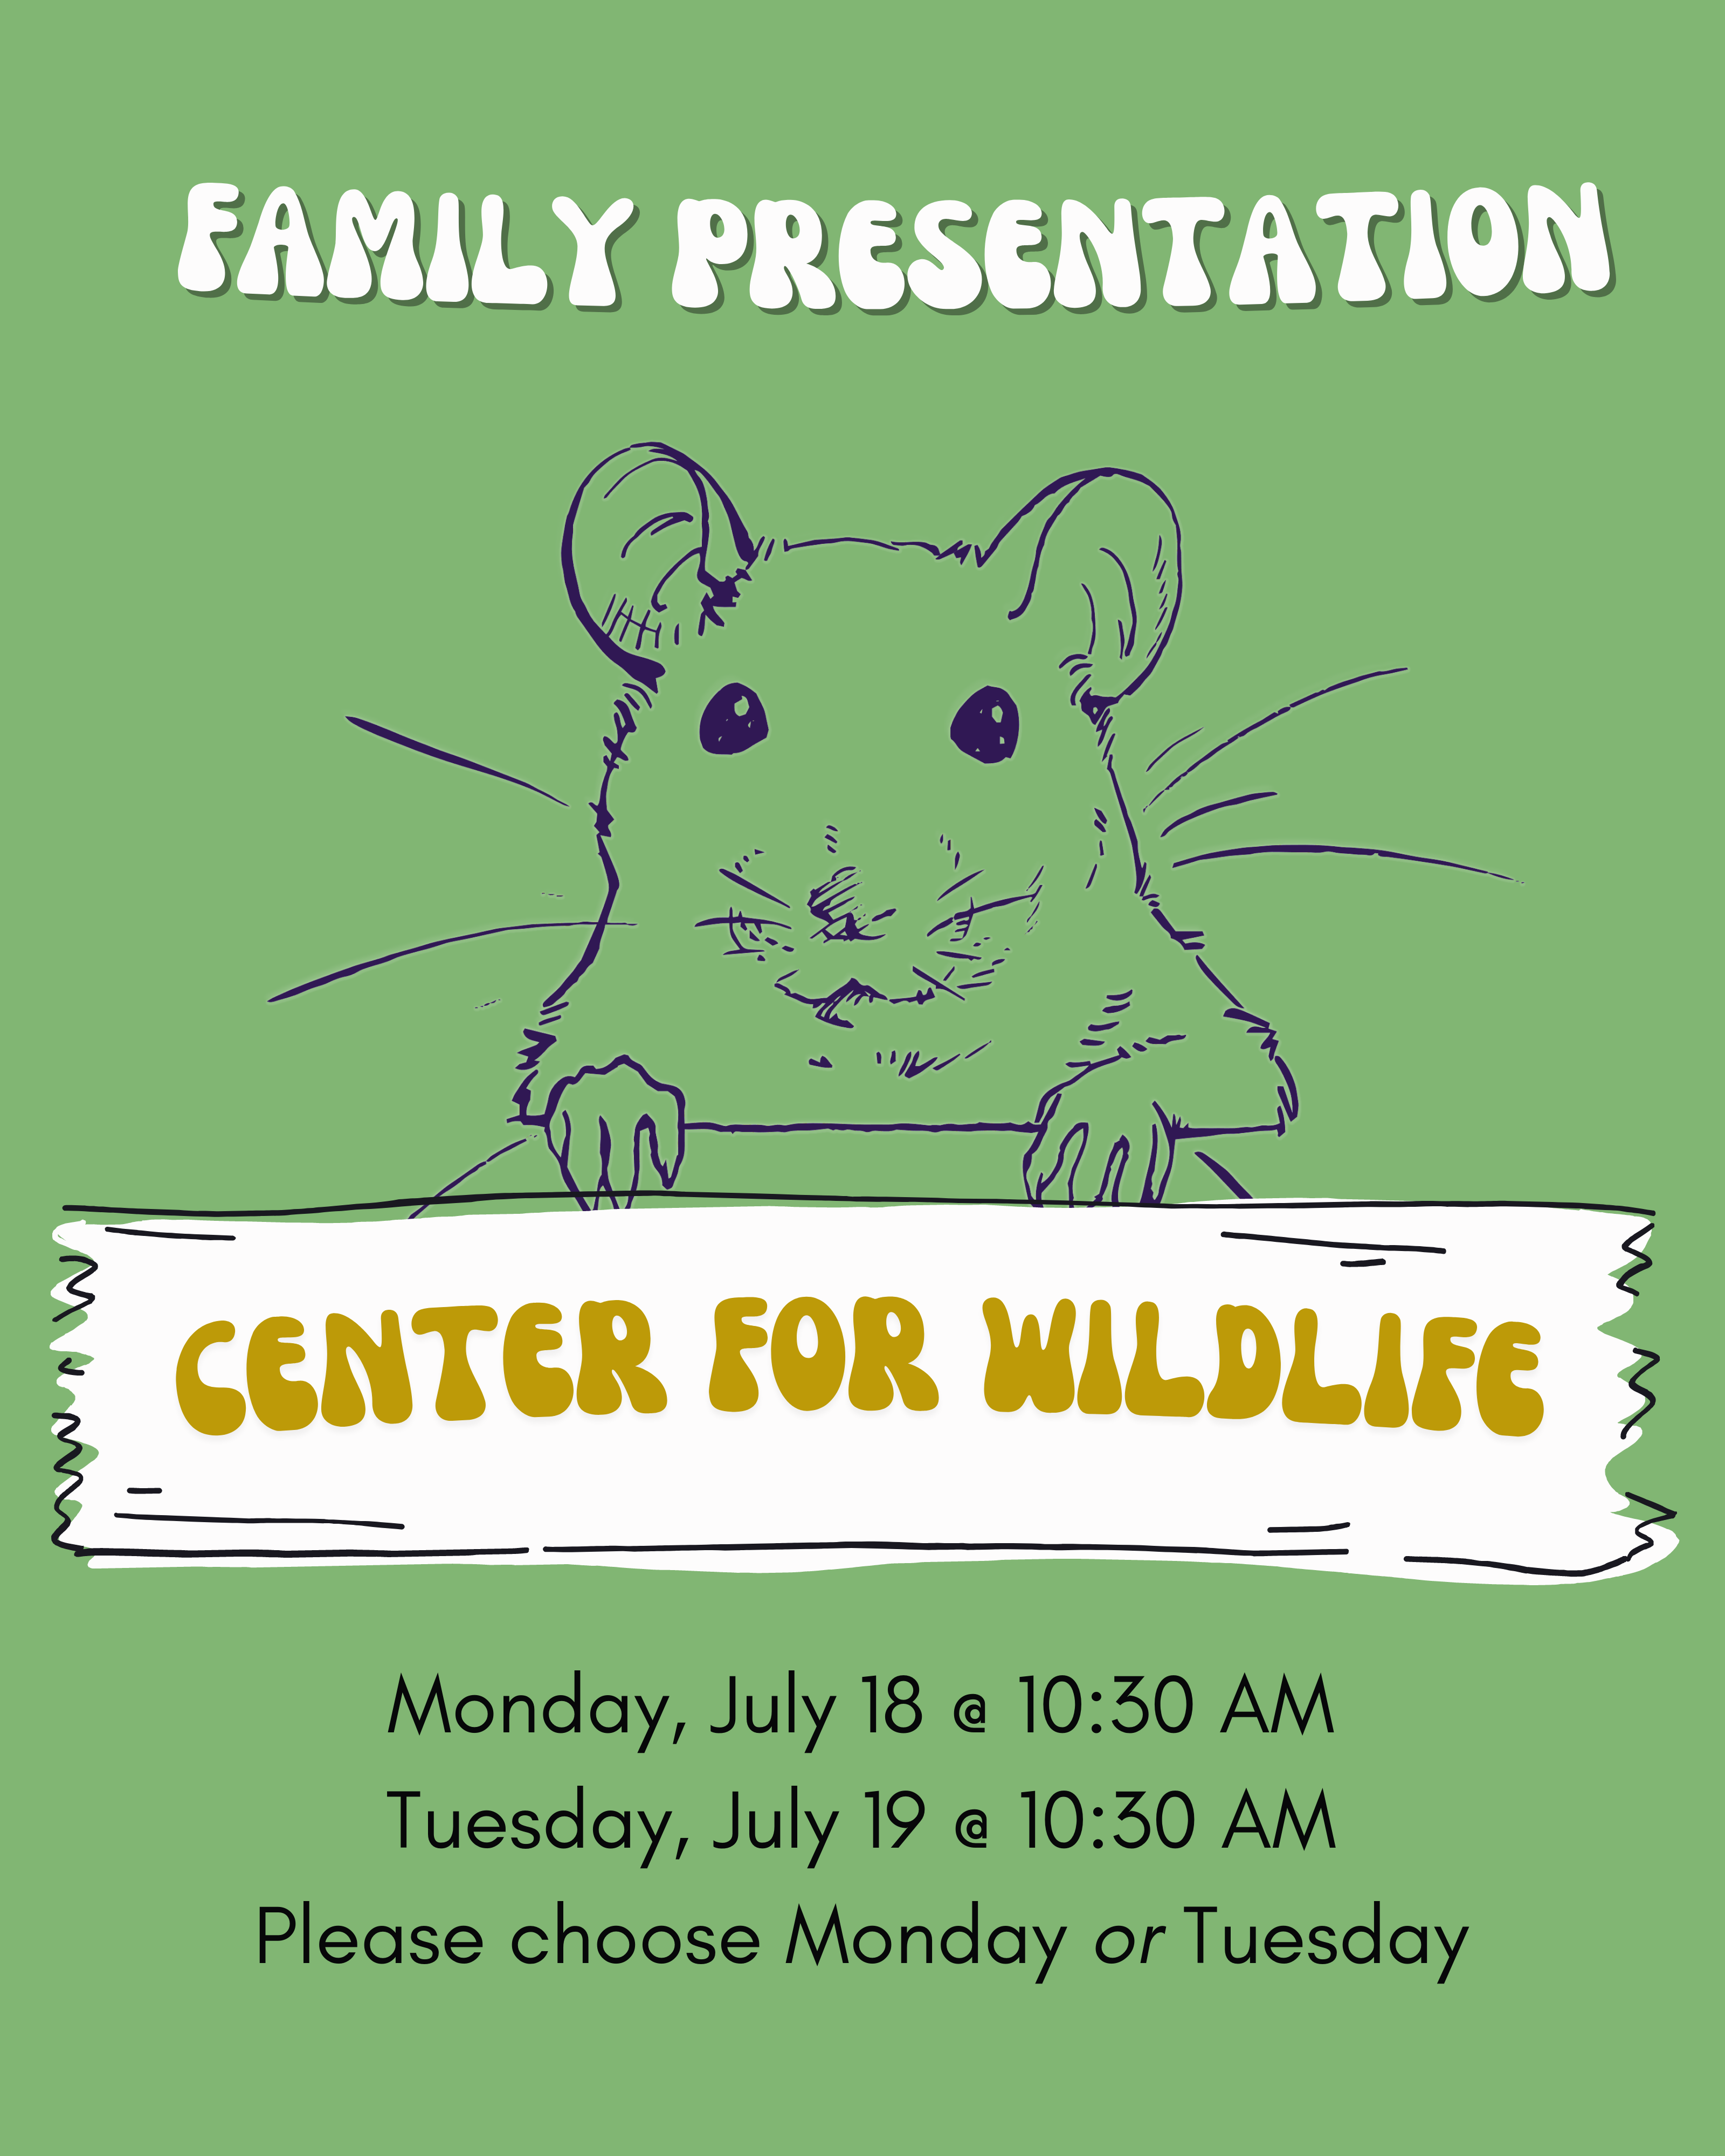 Line drawing of mouse with banner. Text reads: CENTER FOR WILDLIFE FAMILY PRESENTATION Monday, July 18 @ 10:30 AM Tuesday, July 19 @ 10:30 AM Please choose monday or Tuesday